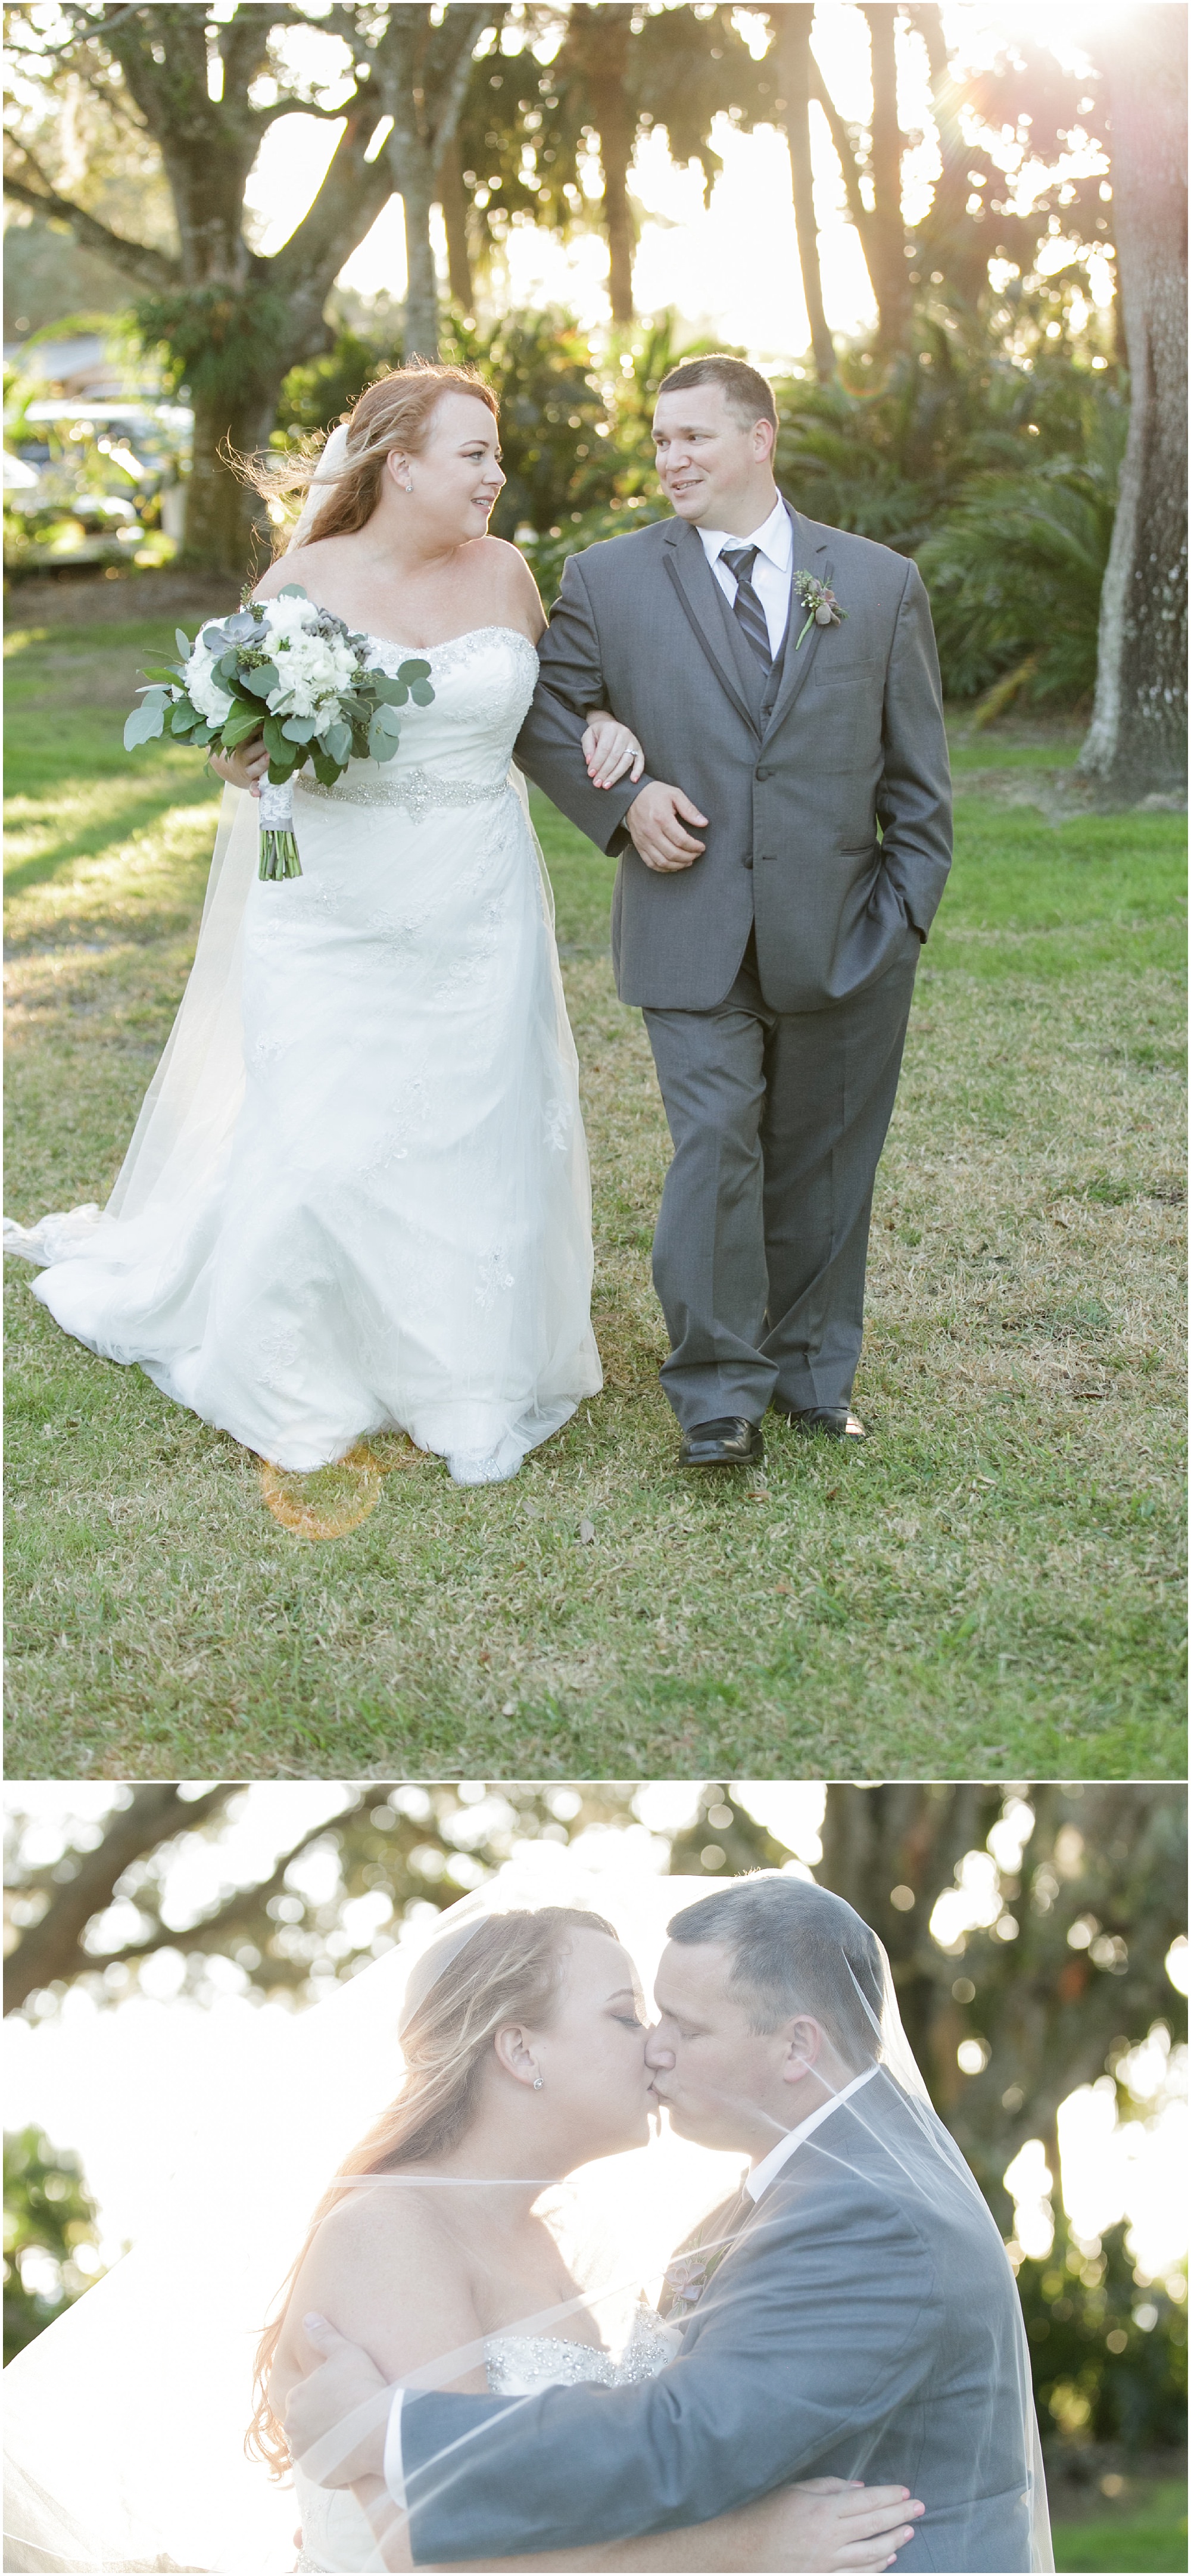 Portraits of the bride and groom as they are walking and then they kiss under the brides veil. 